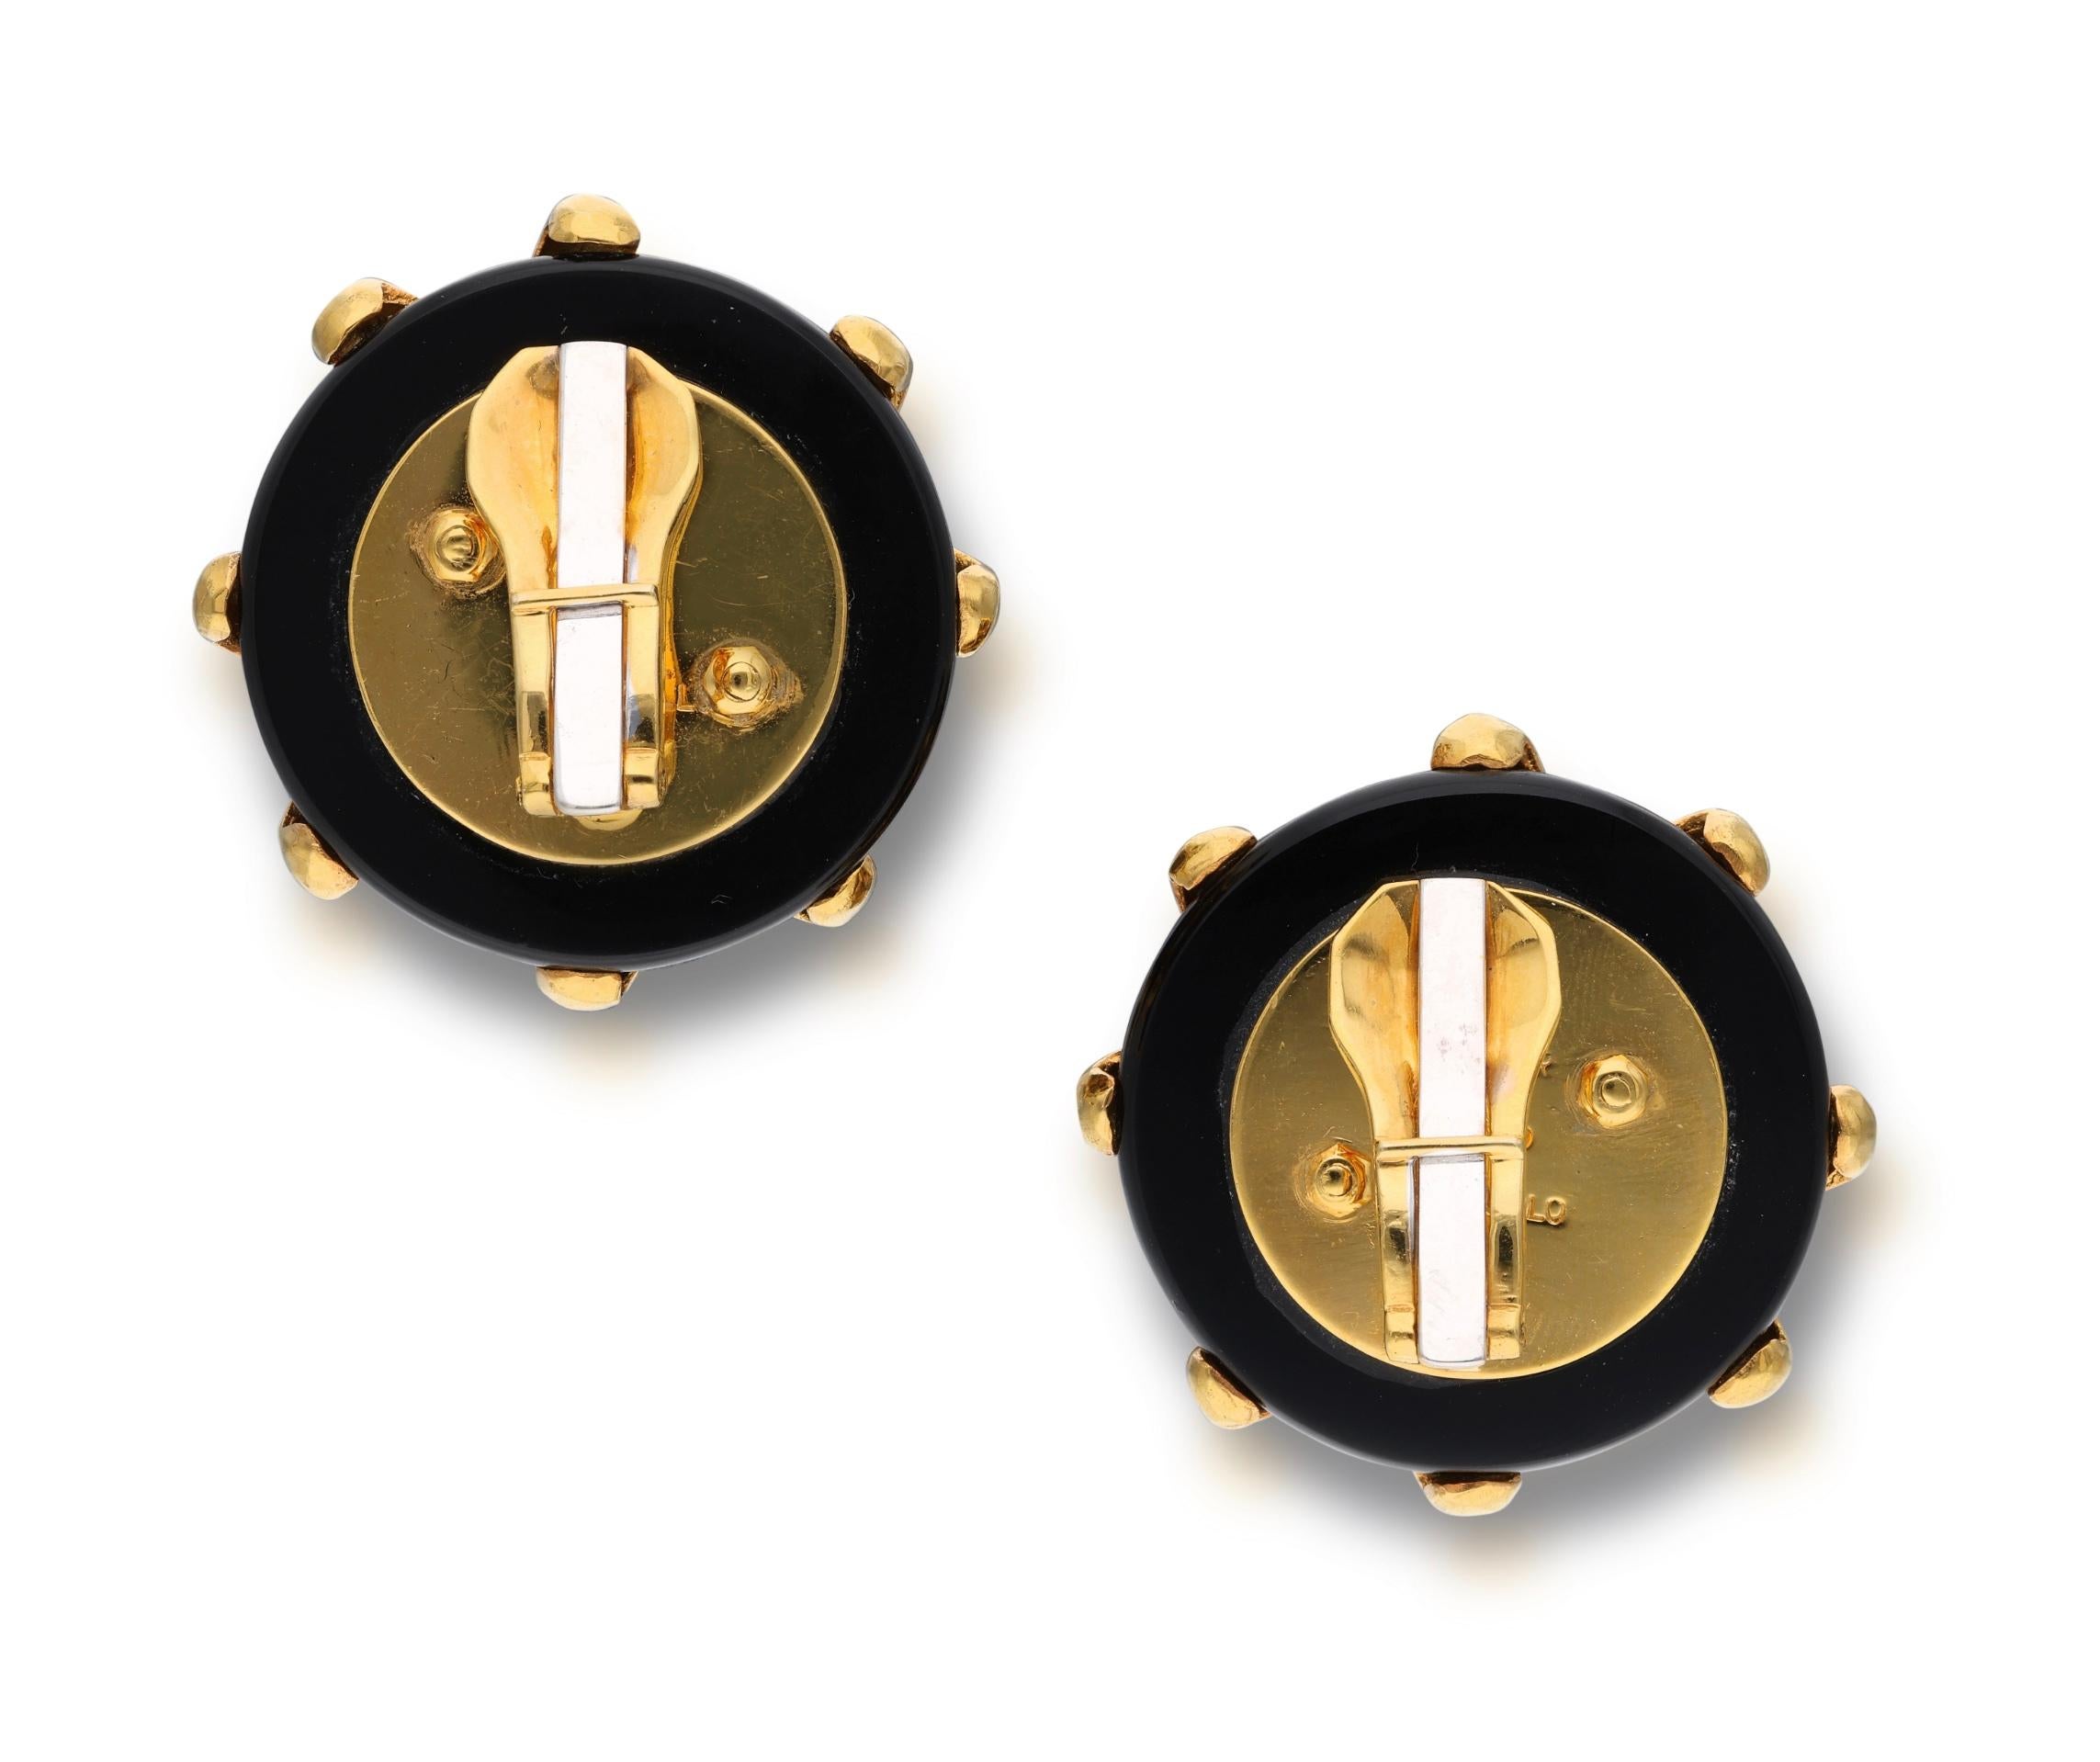 Composed of onyx and gold.

- Signed Cartier, A. Cipullo
- Circa 1973
- 18 karat yellow gold
- Total weight 40 grams
- Length 1.25 inches

The condition report is Very Good. 

Perfect for weekends. 